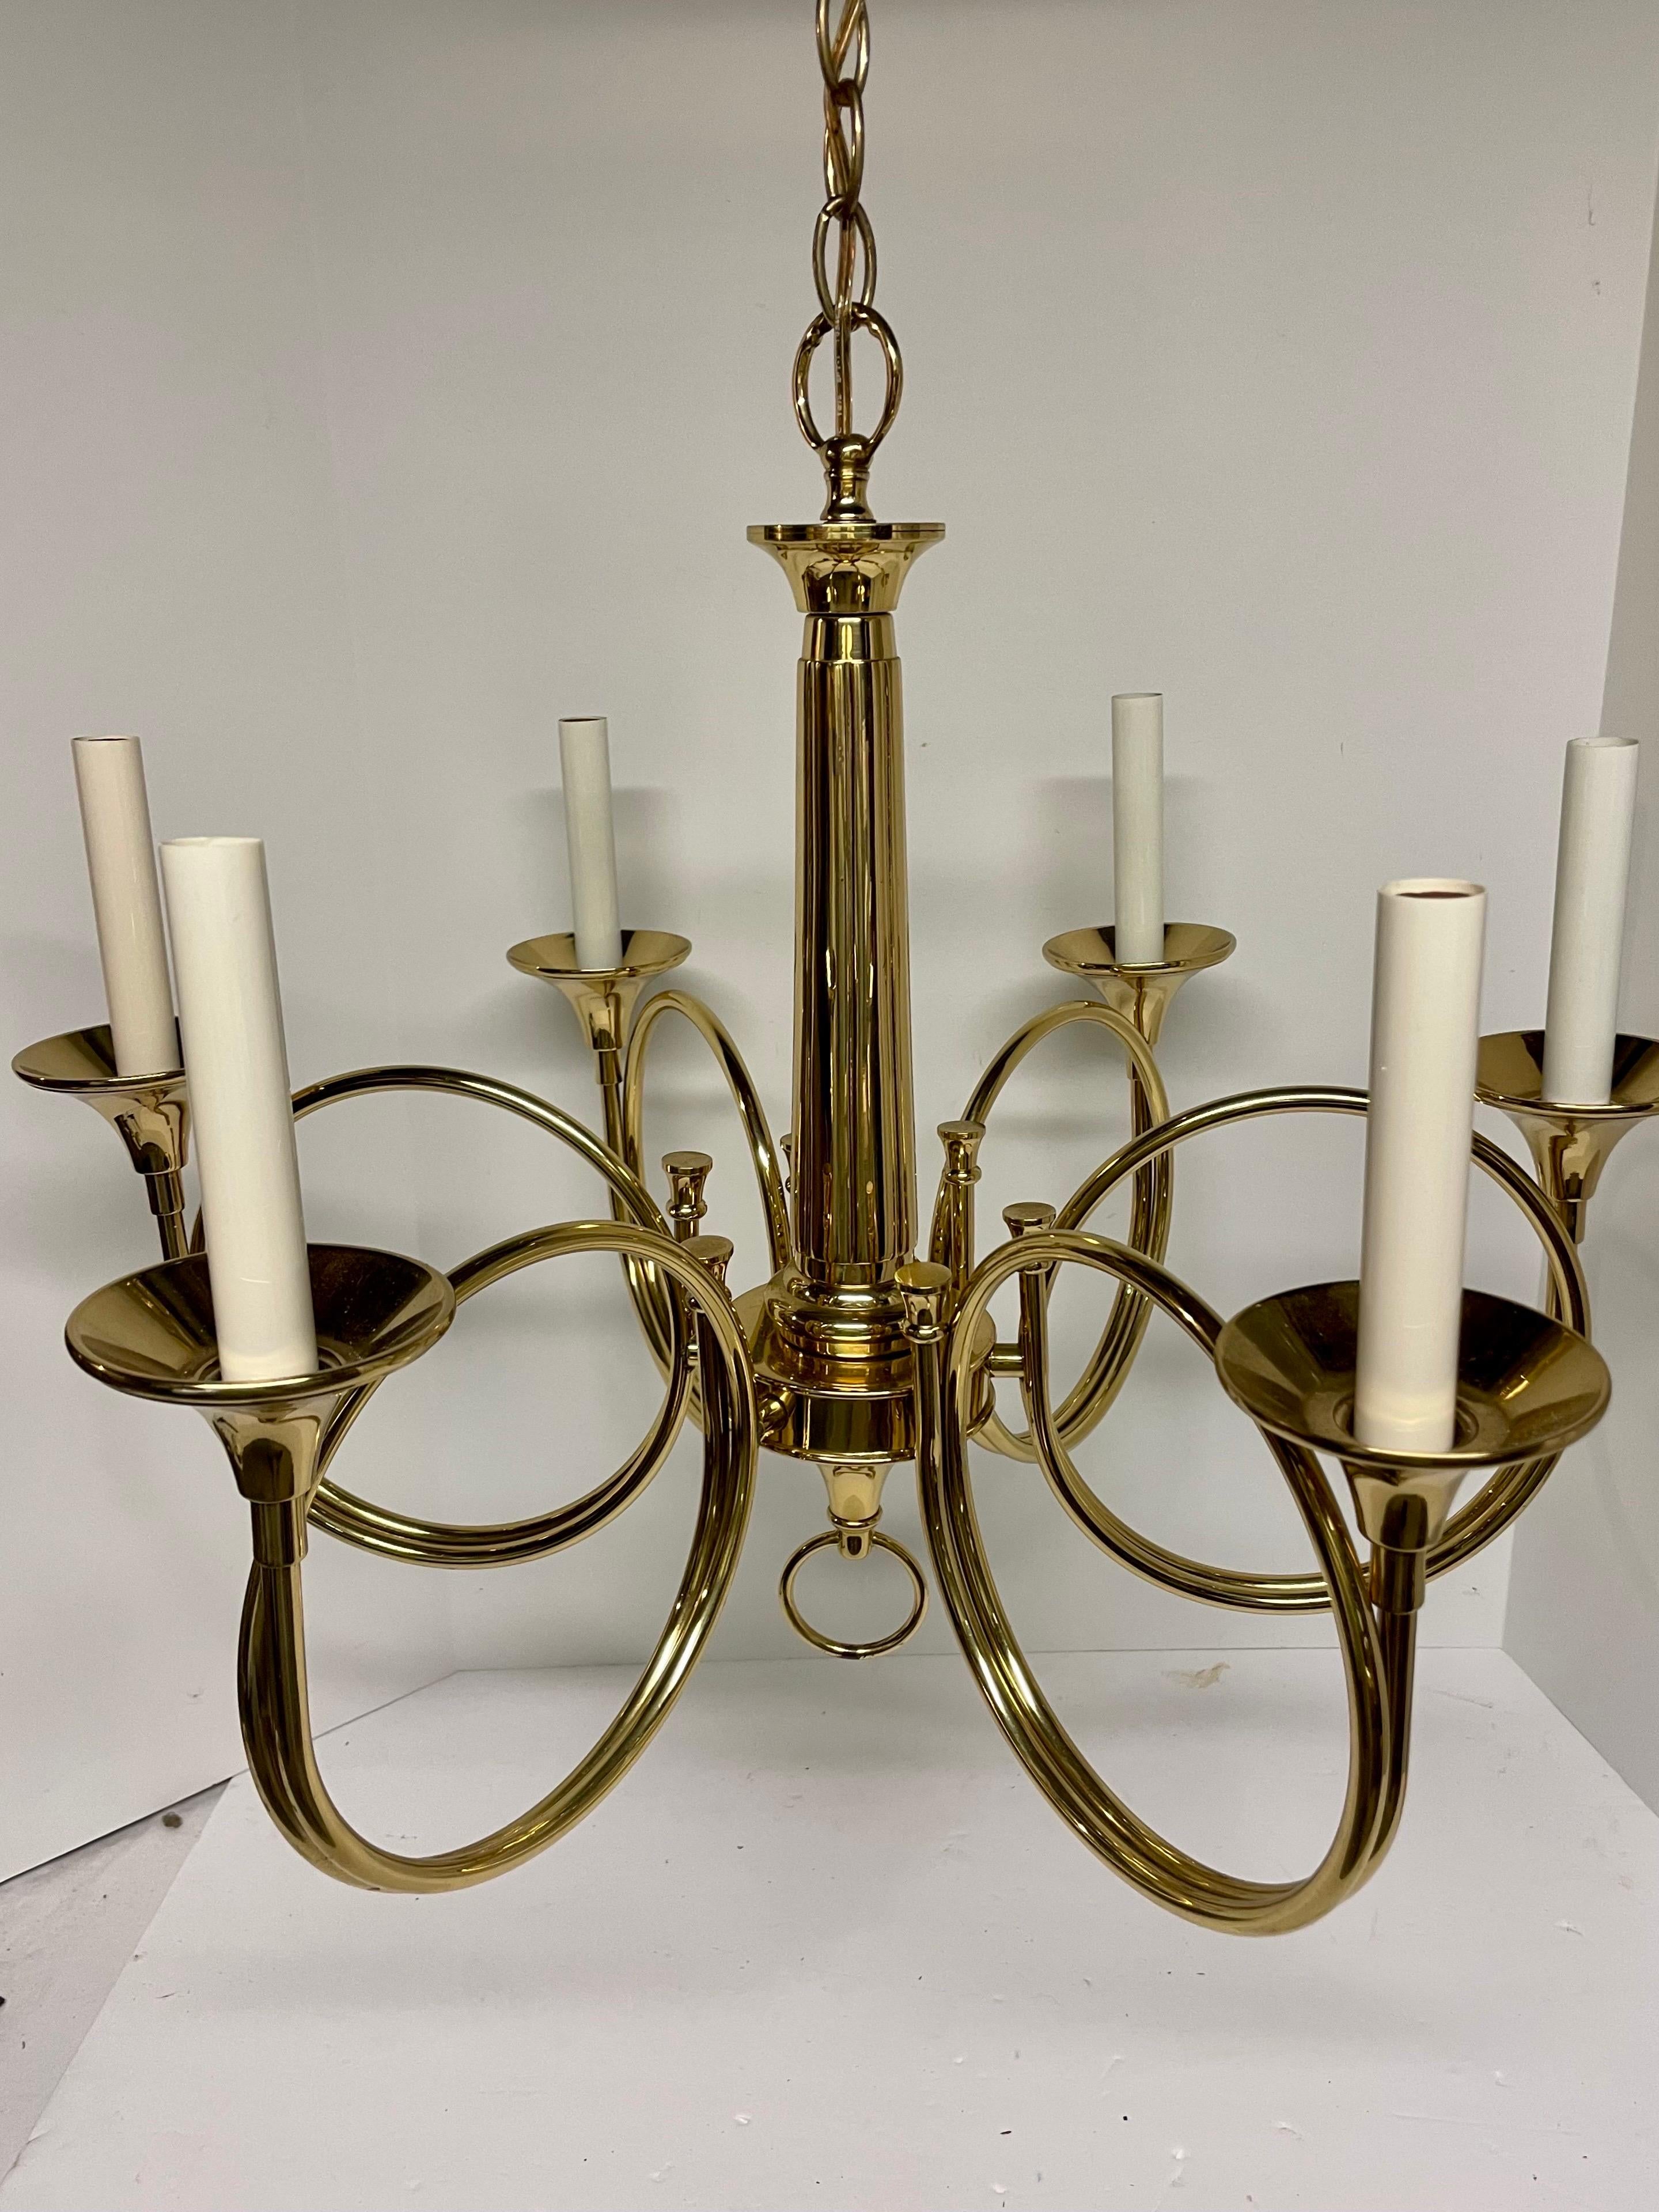 Solid Brass Hollywood Regency hunting horn chandelier with receded center column with six arms. Includes original brass ceiling canopy. Rewired with extra long wire. Extra chain can be added to increase length. Measures 24